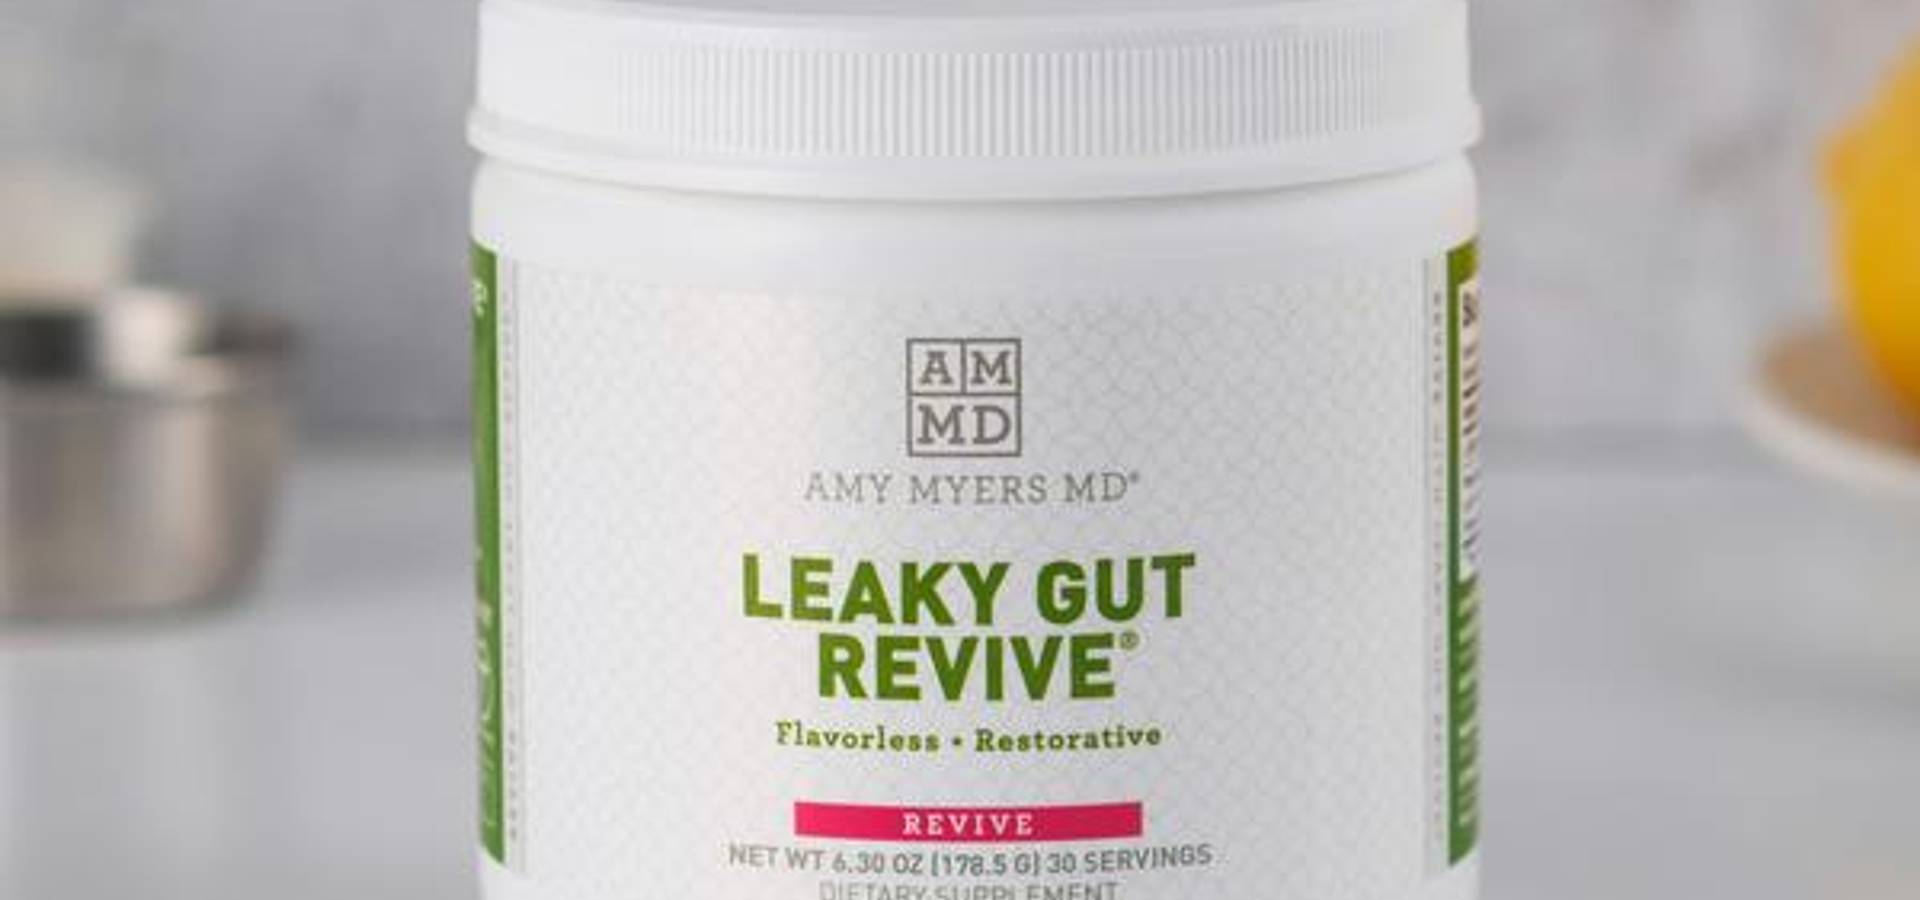 Leaky Gut Revive Price